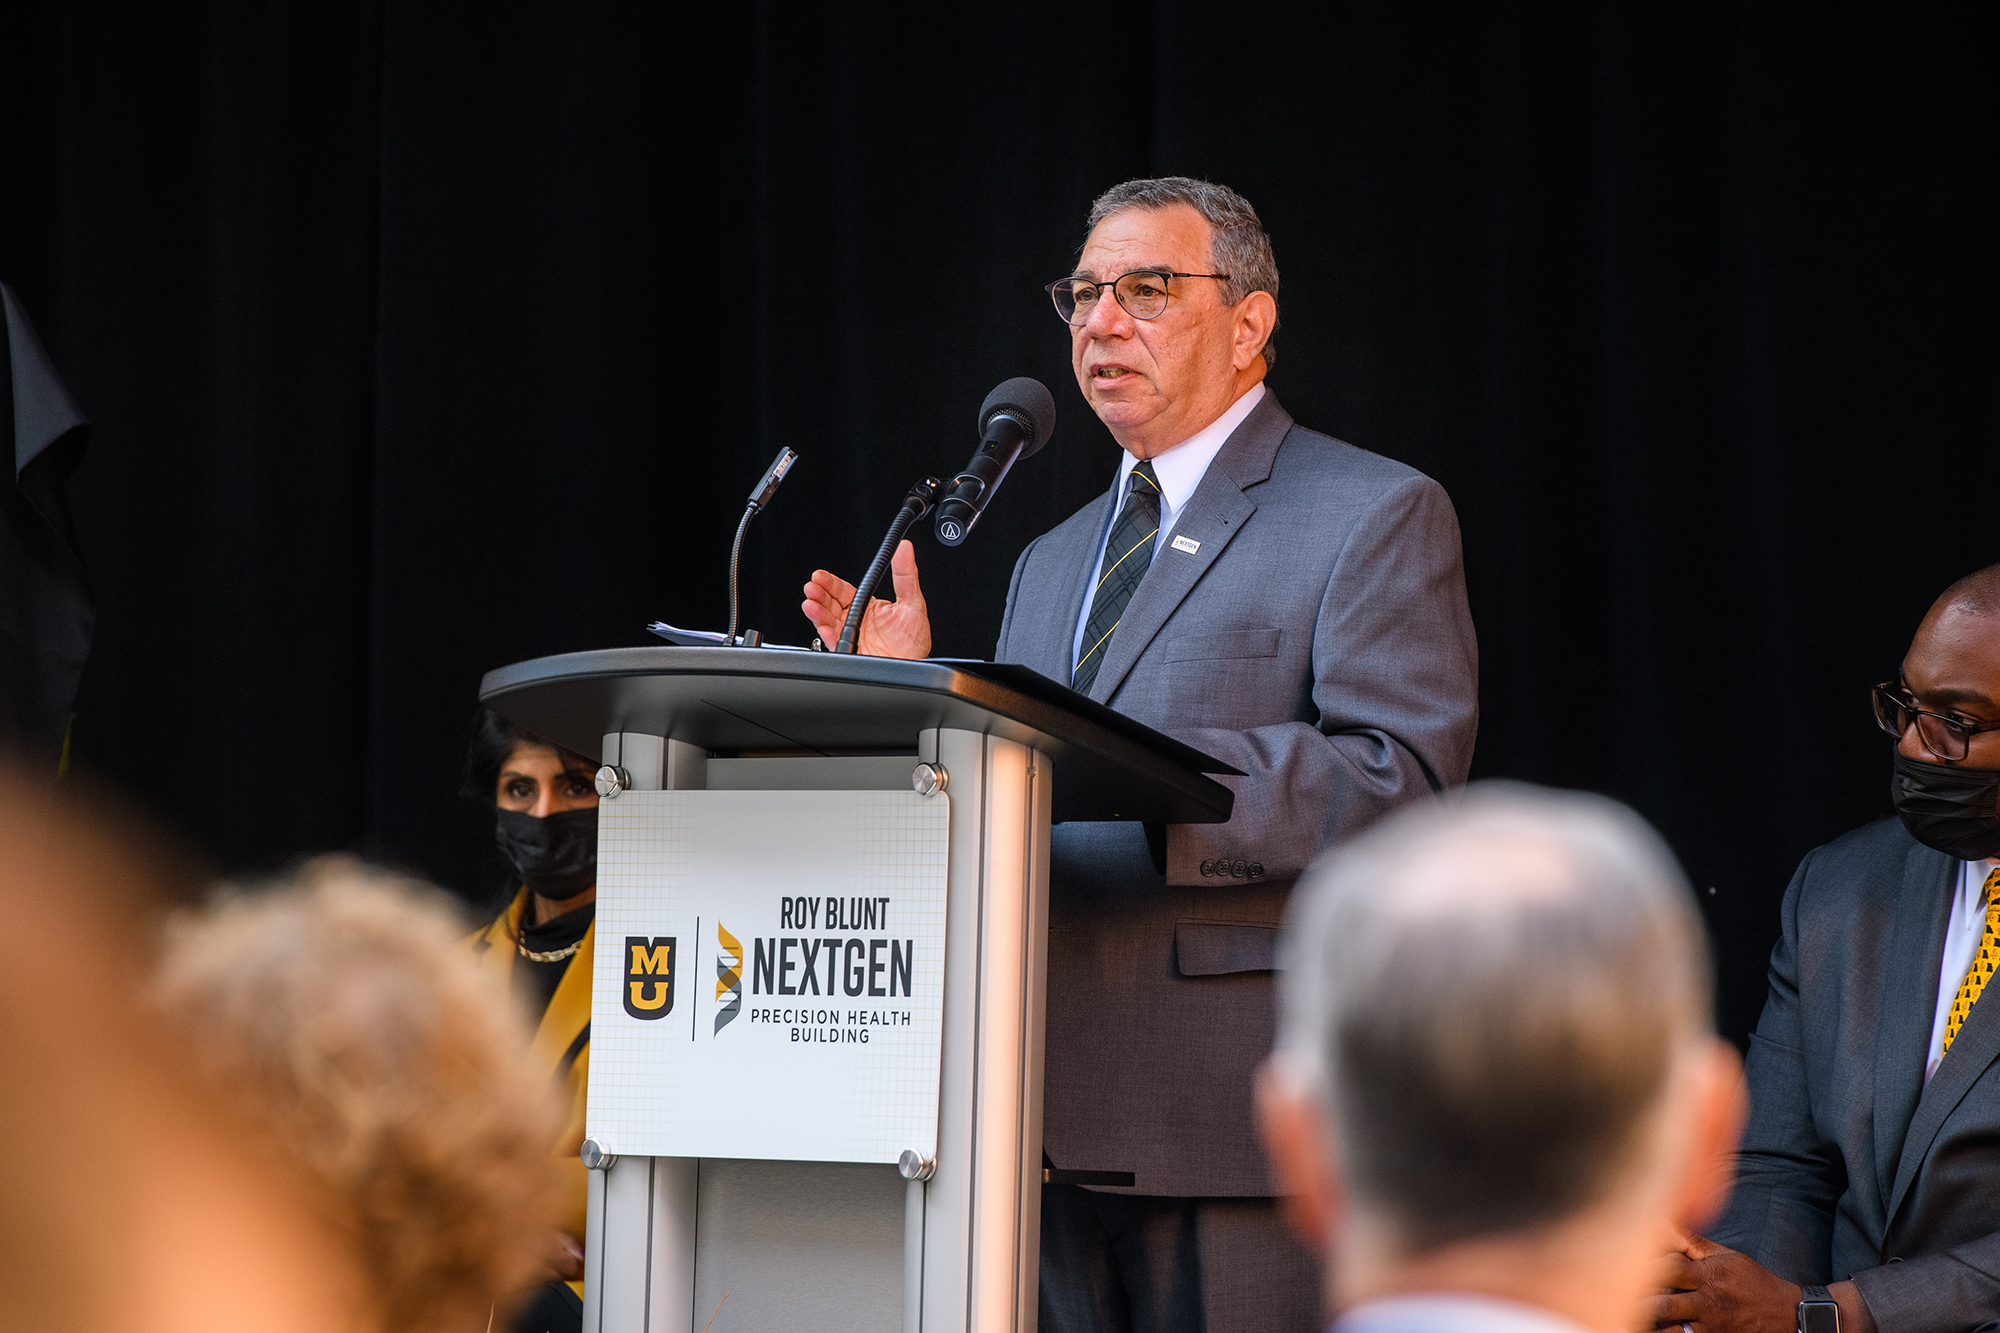 Richard Barohn, MD, Executive Vice Chancellor for Health Affairs, Executive Director, NextGen Precision Health talks during the Roy Blunt NextGen building Grand Opening Program on Tuesday, Oct. 19, 2021 in Columbia, Mo.